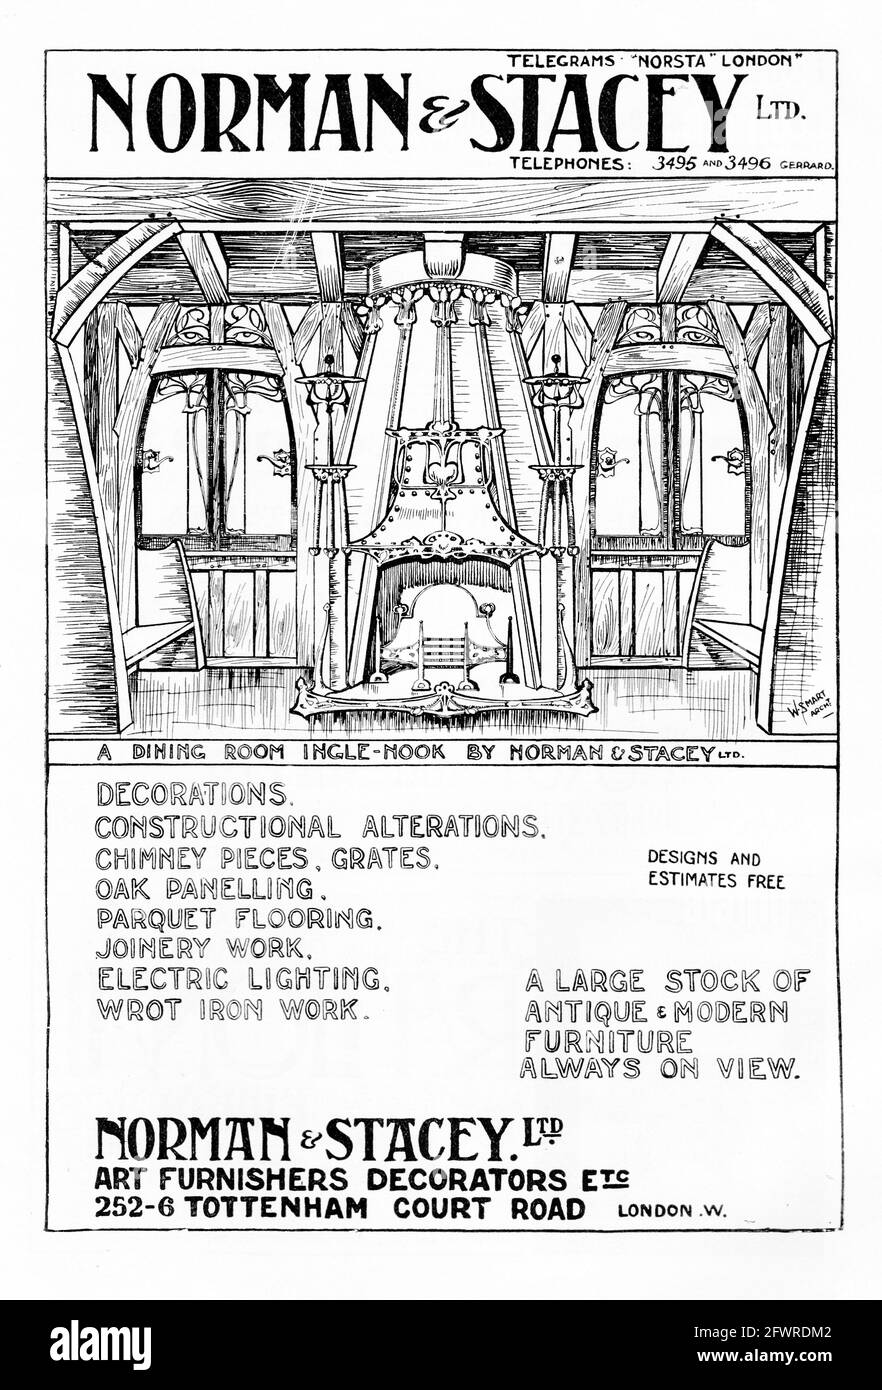 “Norman & Stacey Ltd. Art Furnishers and Decorators”. 1902 advertisement by Norman & Stacey Ltd., Tottenham Court Rd., London for Arts & Crafts and Art Nouveau style decorations, constructional alterations, chimney pieces, grates, oak panelling, parquet flooring, joinery work, electric lighting and wrot iron work. Stock Photo